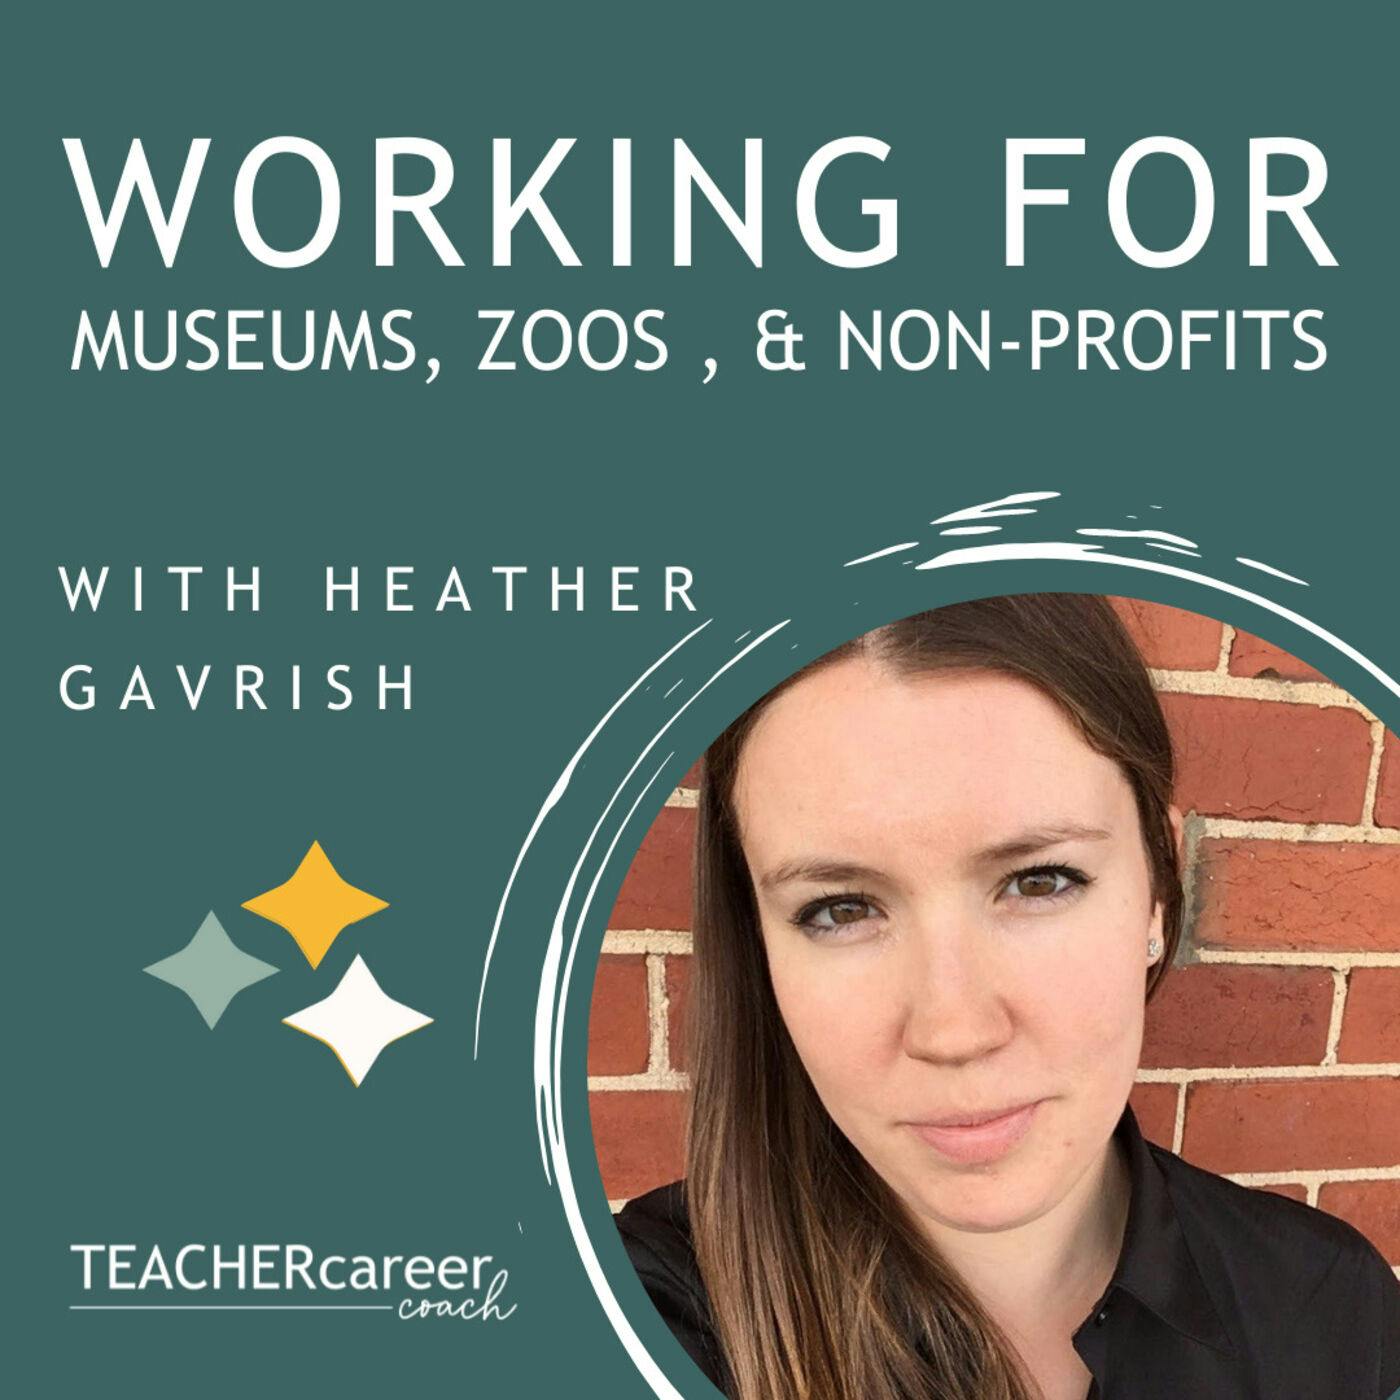 53 - Heather Gavrish: Working for Museums, Zoos, and Non-Profits